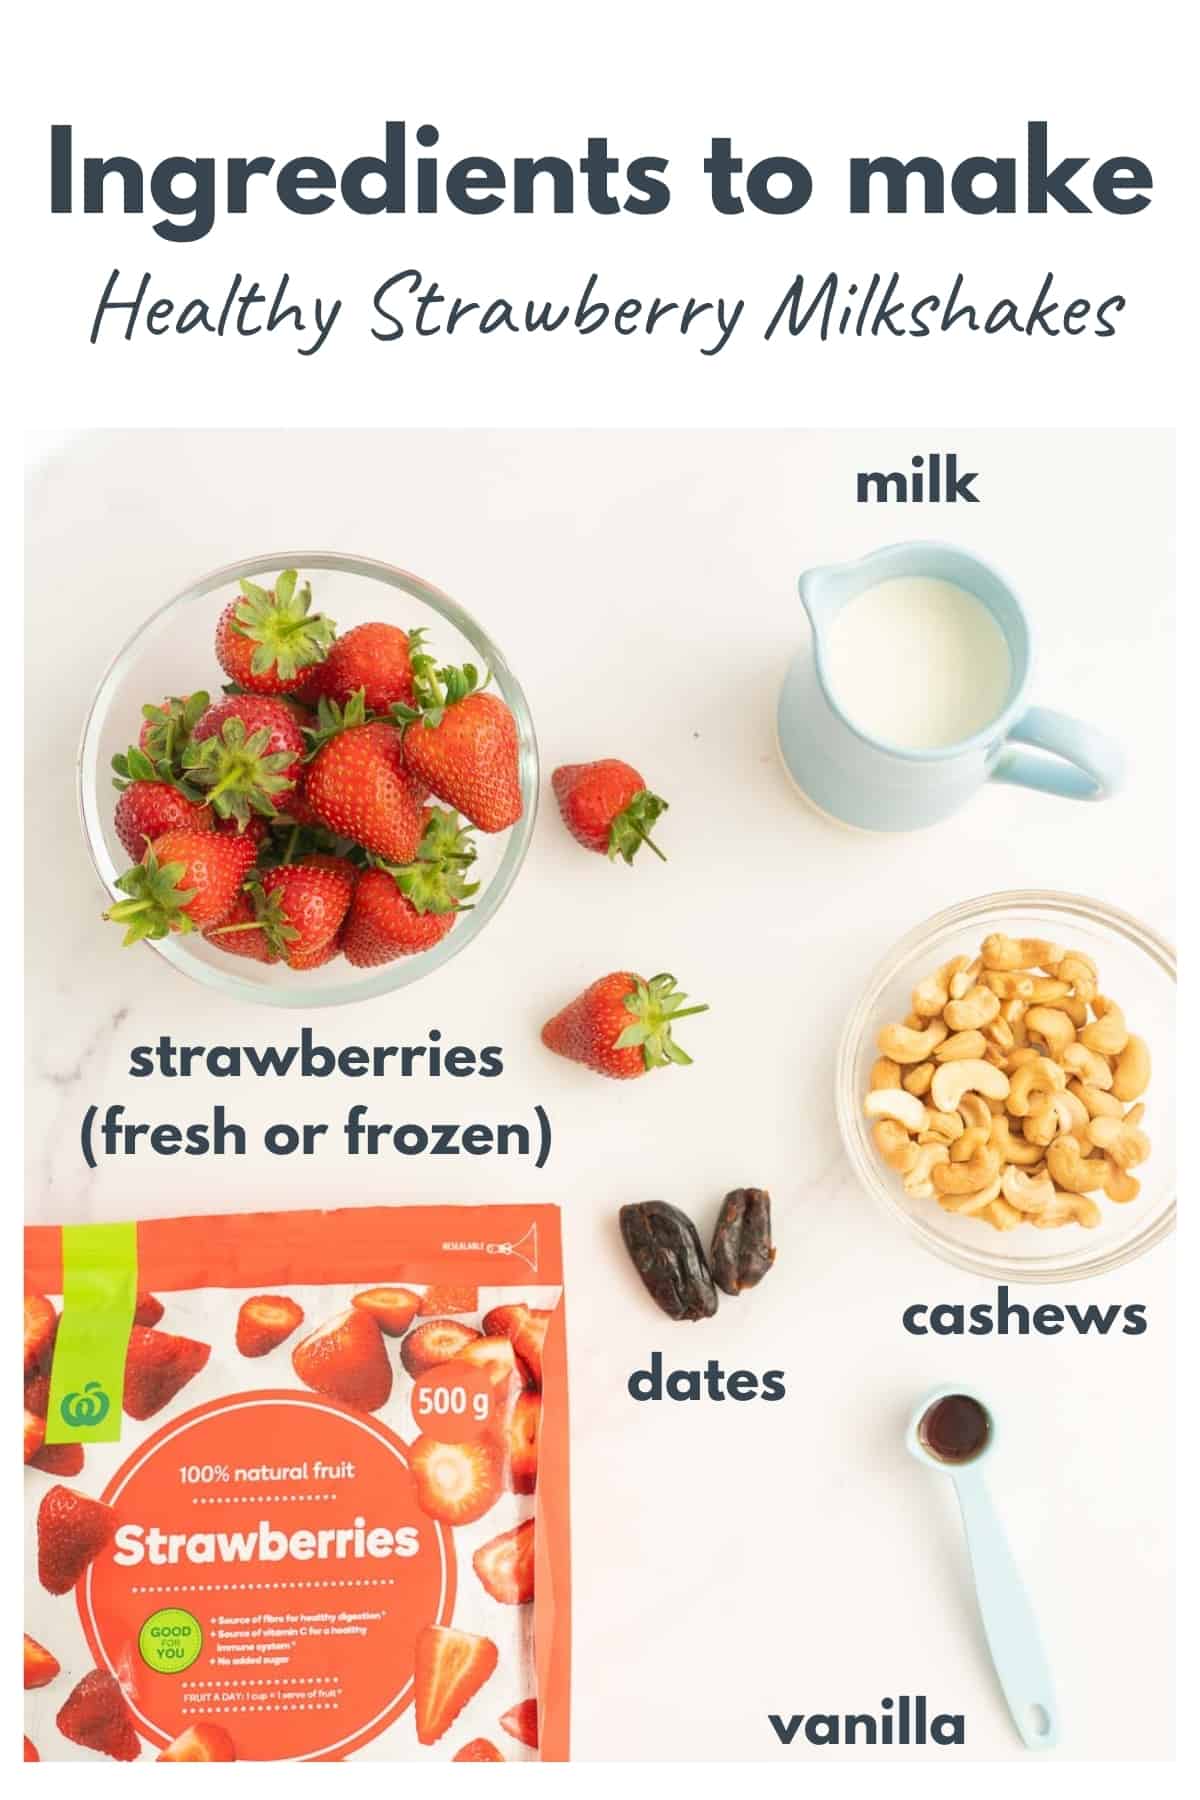 Ingredients to make a healthy milk shake laid out on a bench top with text overlay.